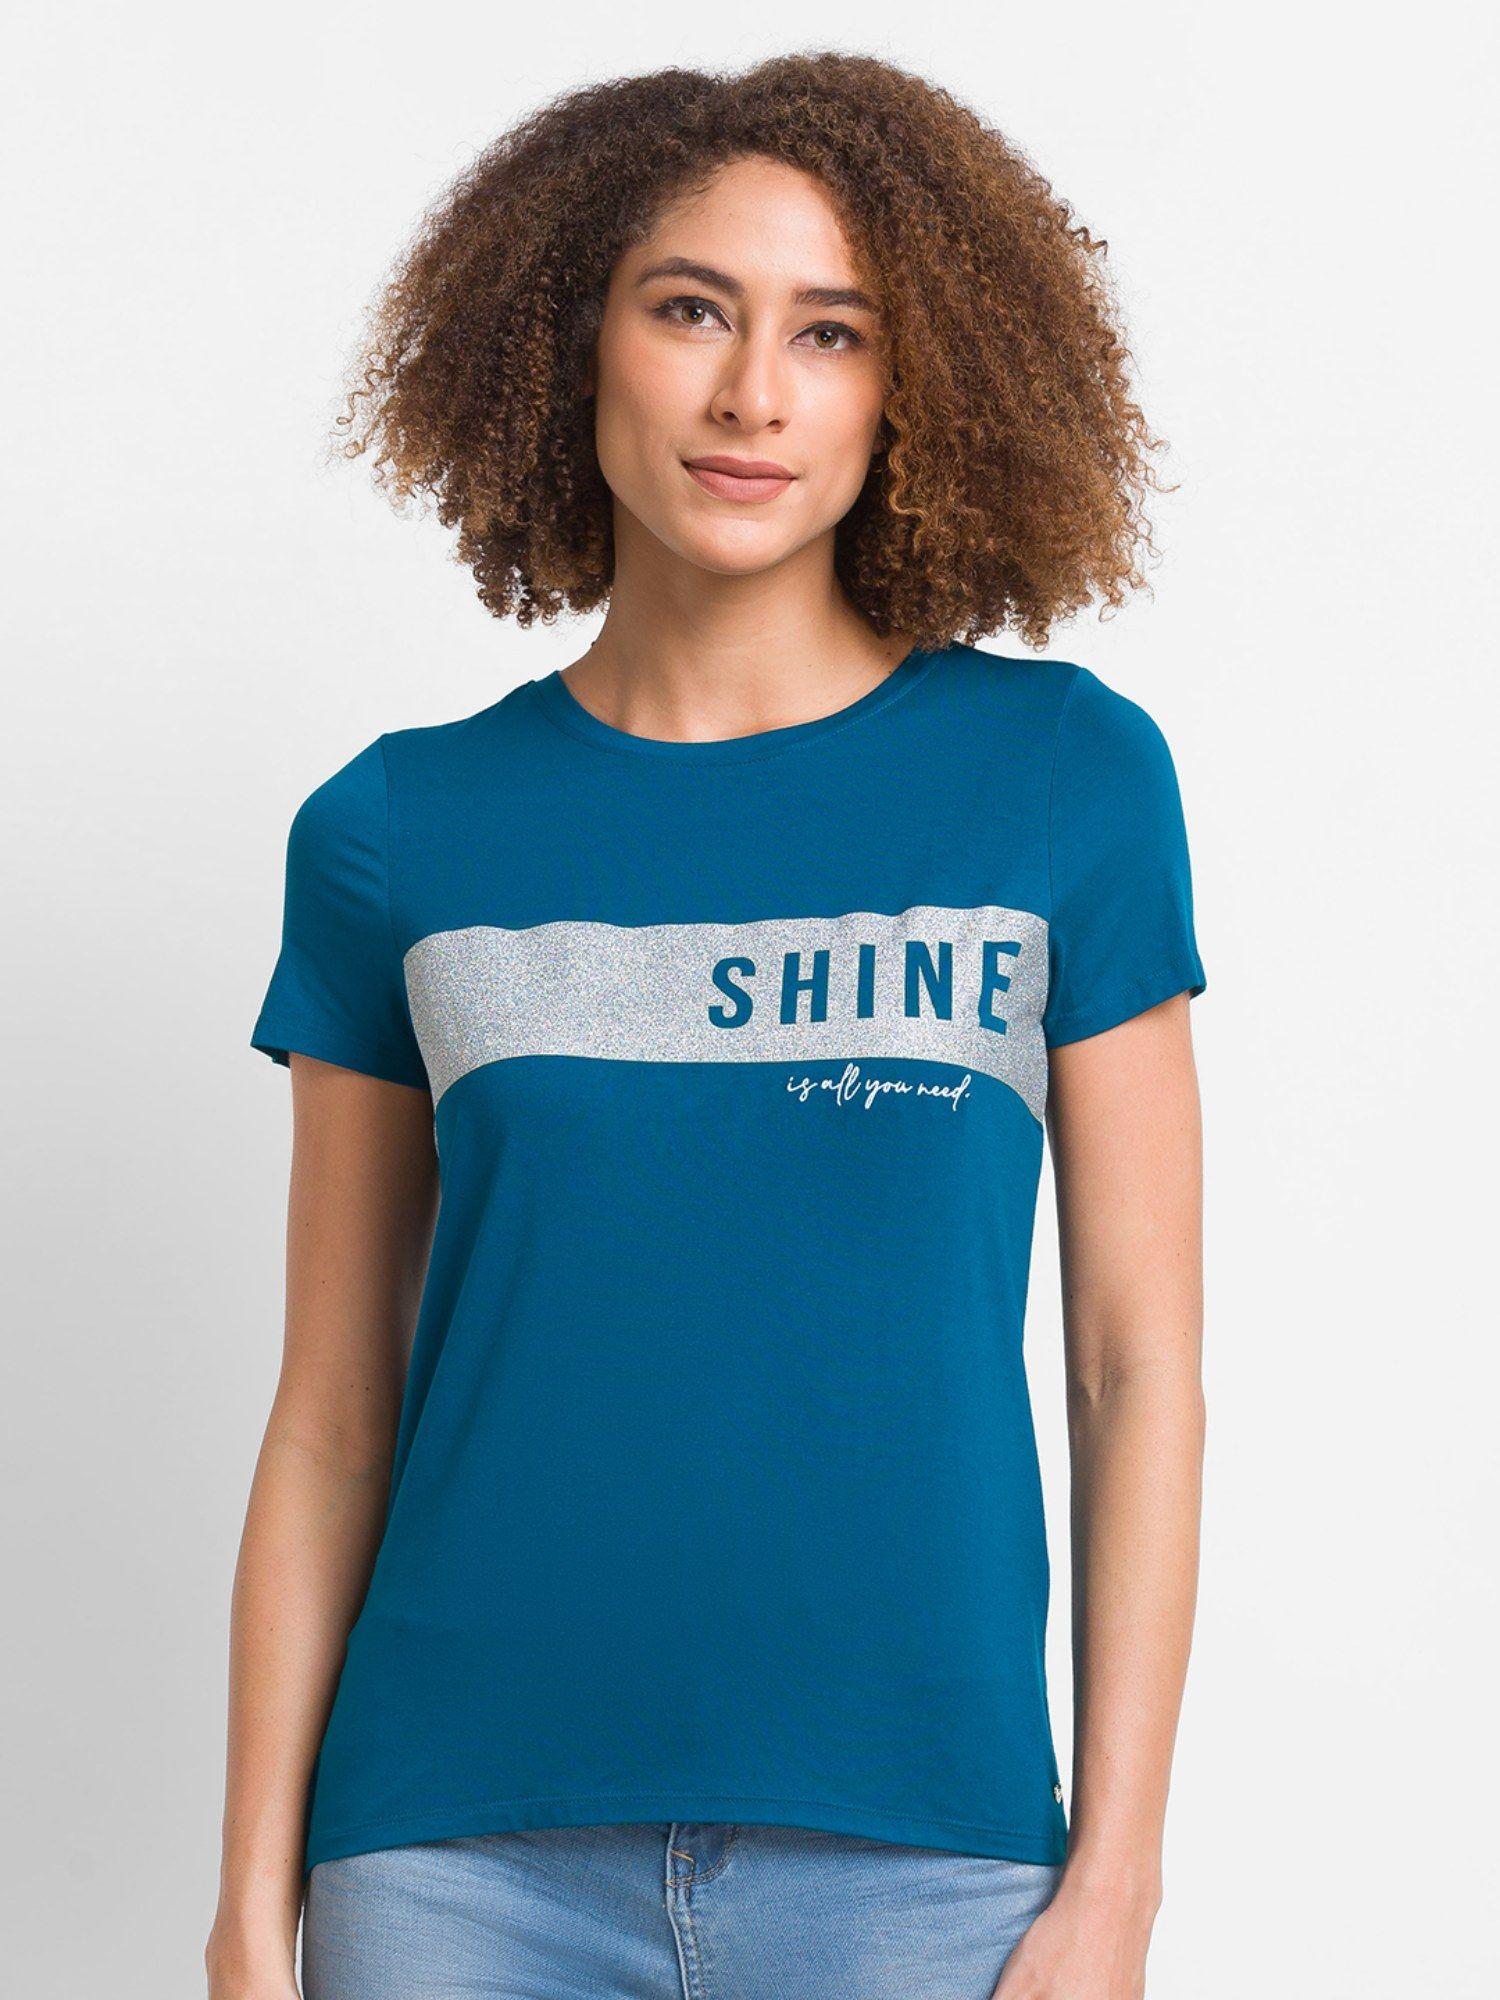 teal blue cotton blend half sleeve printed casual t-shirt for women